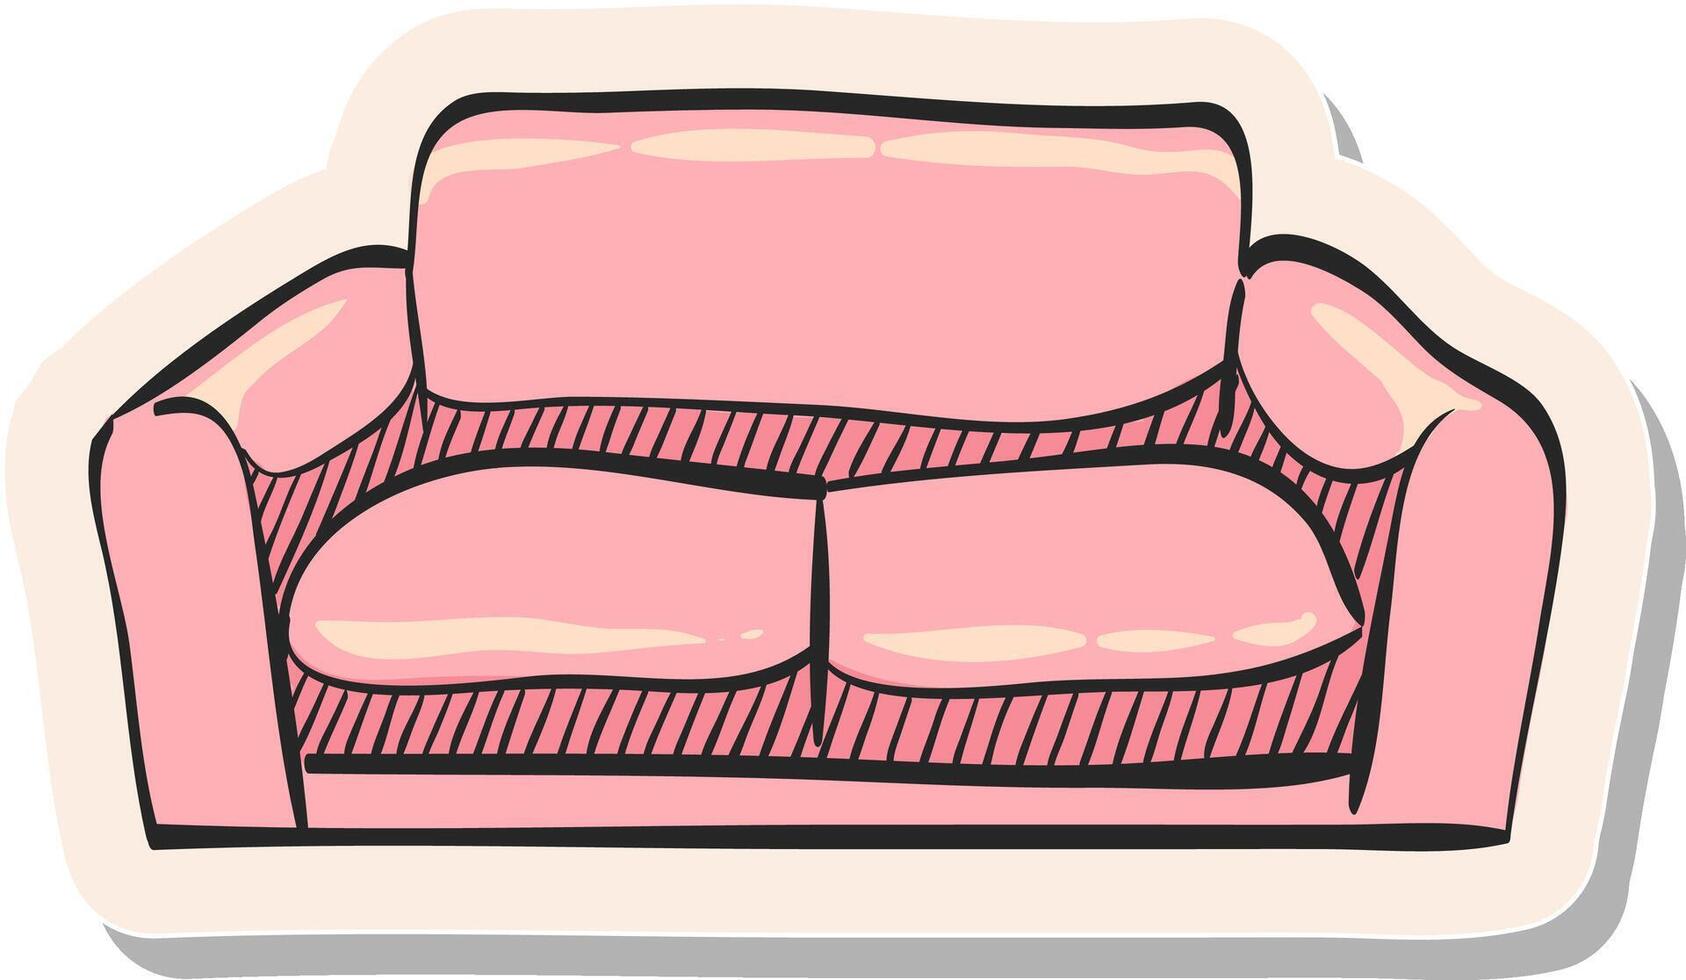 Hand drawn Couch icon in sticker style vector illustration